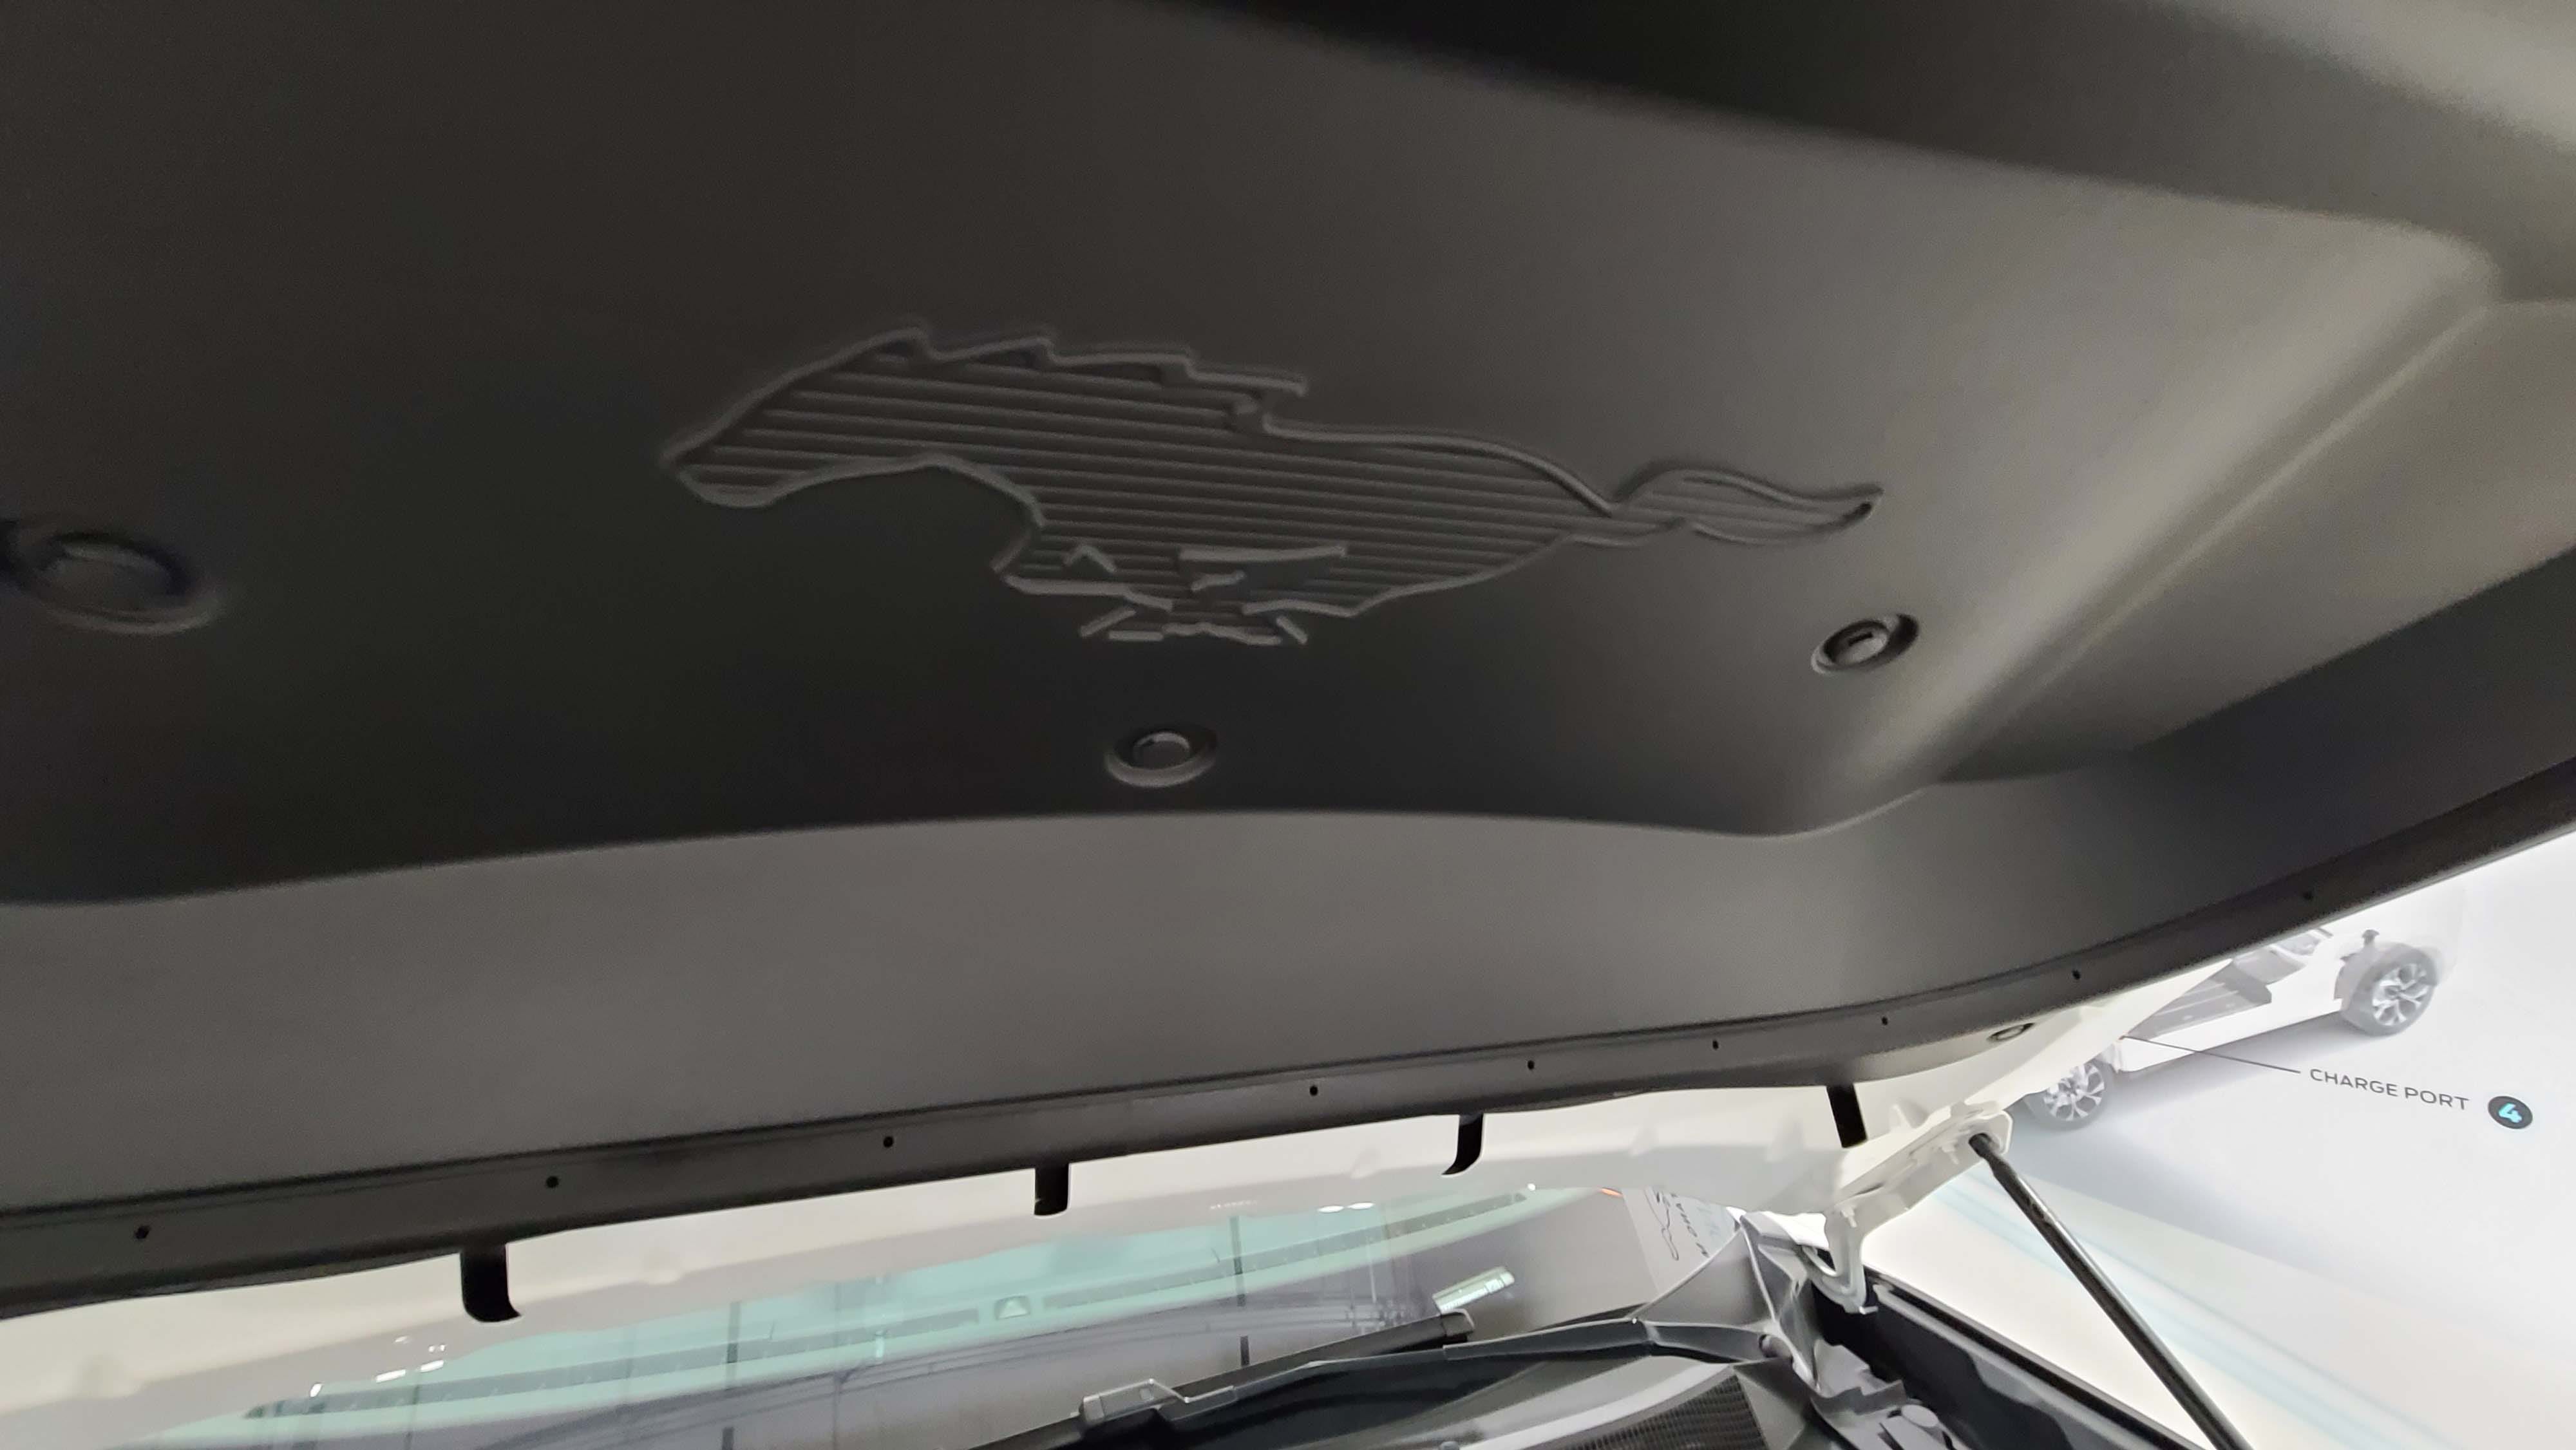 Mustang "Easter eggs" are located all over the 2021 Ford Mustang Mach-E. This one is under the front hood.